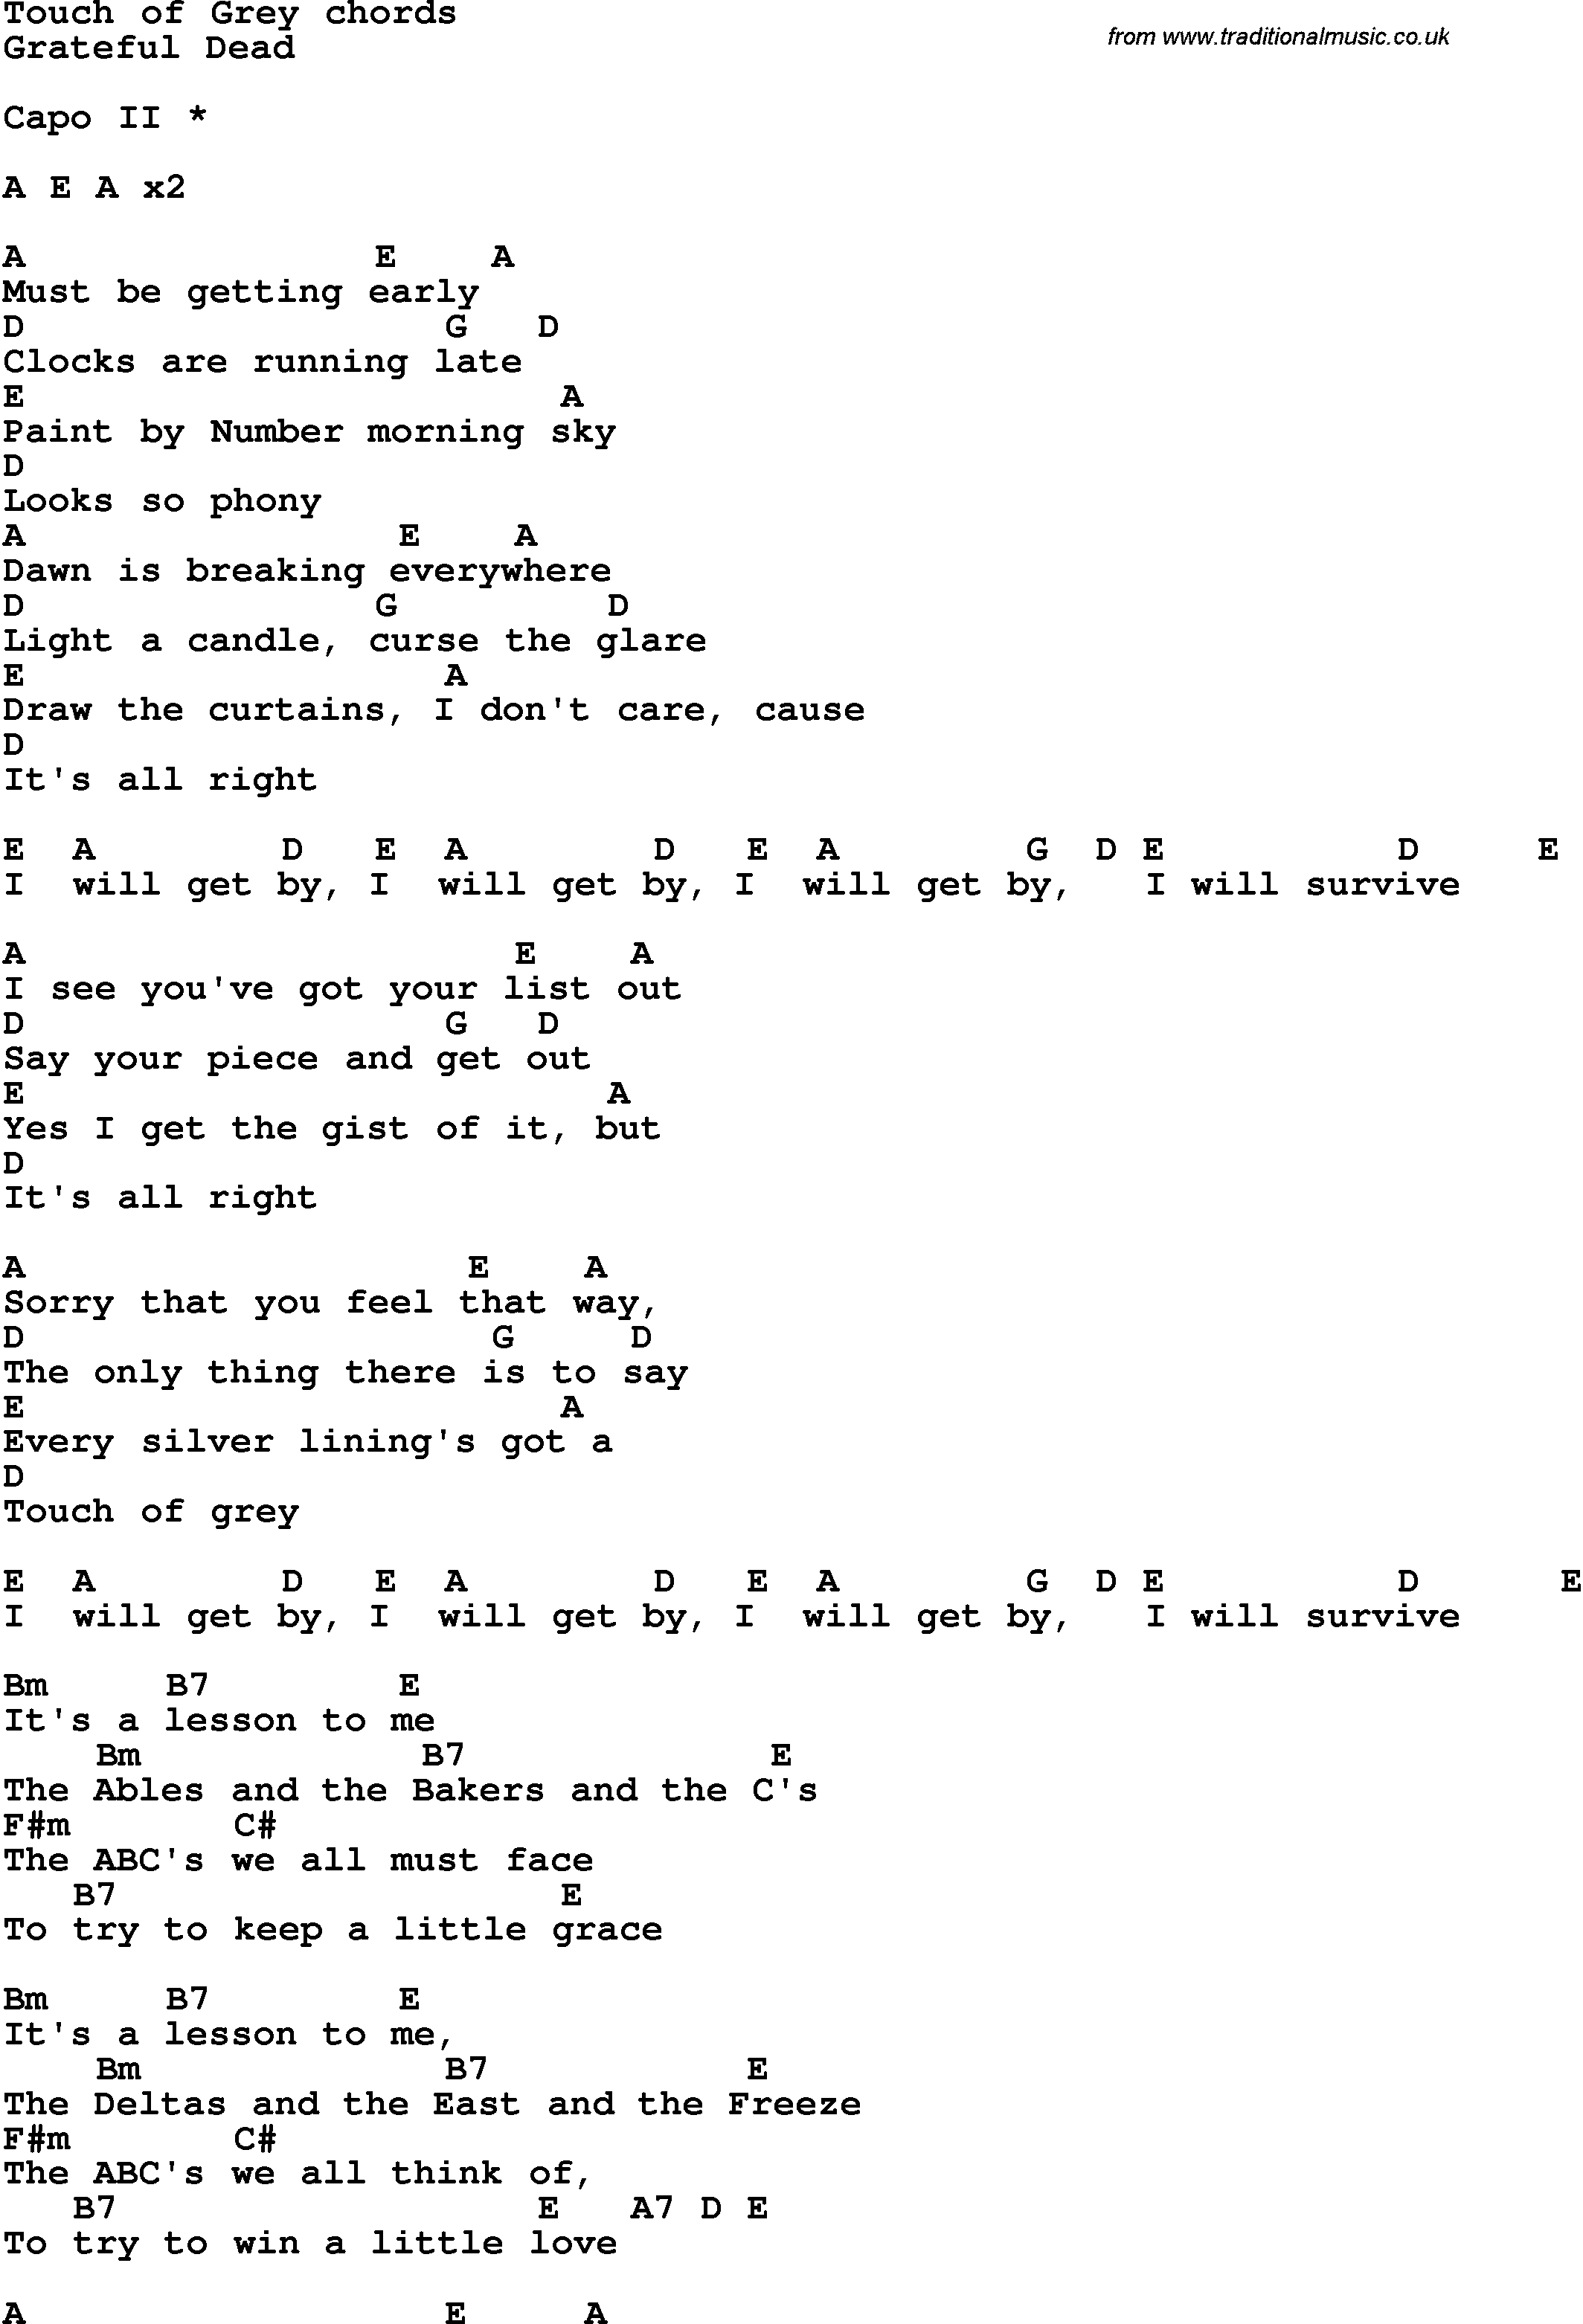 Song Lyrics with guitar chords for Touch of Grey